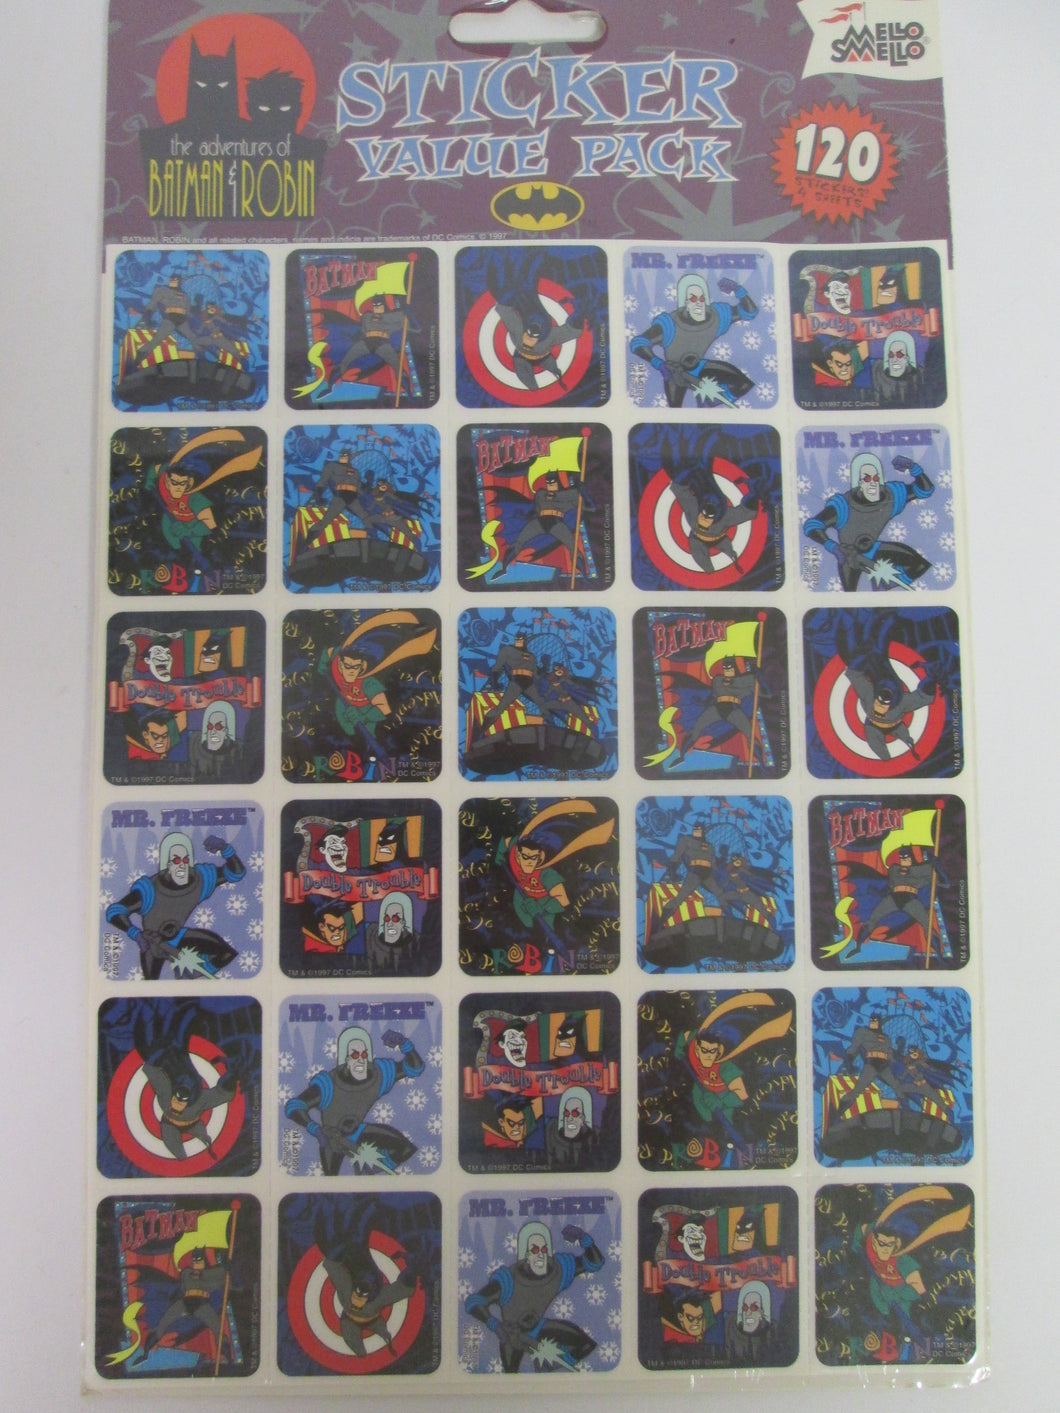 1997 The Adventures of Batman & Robin Sticker Value Pack 120 Stickers